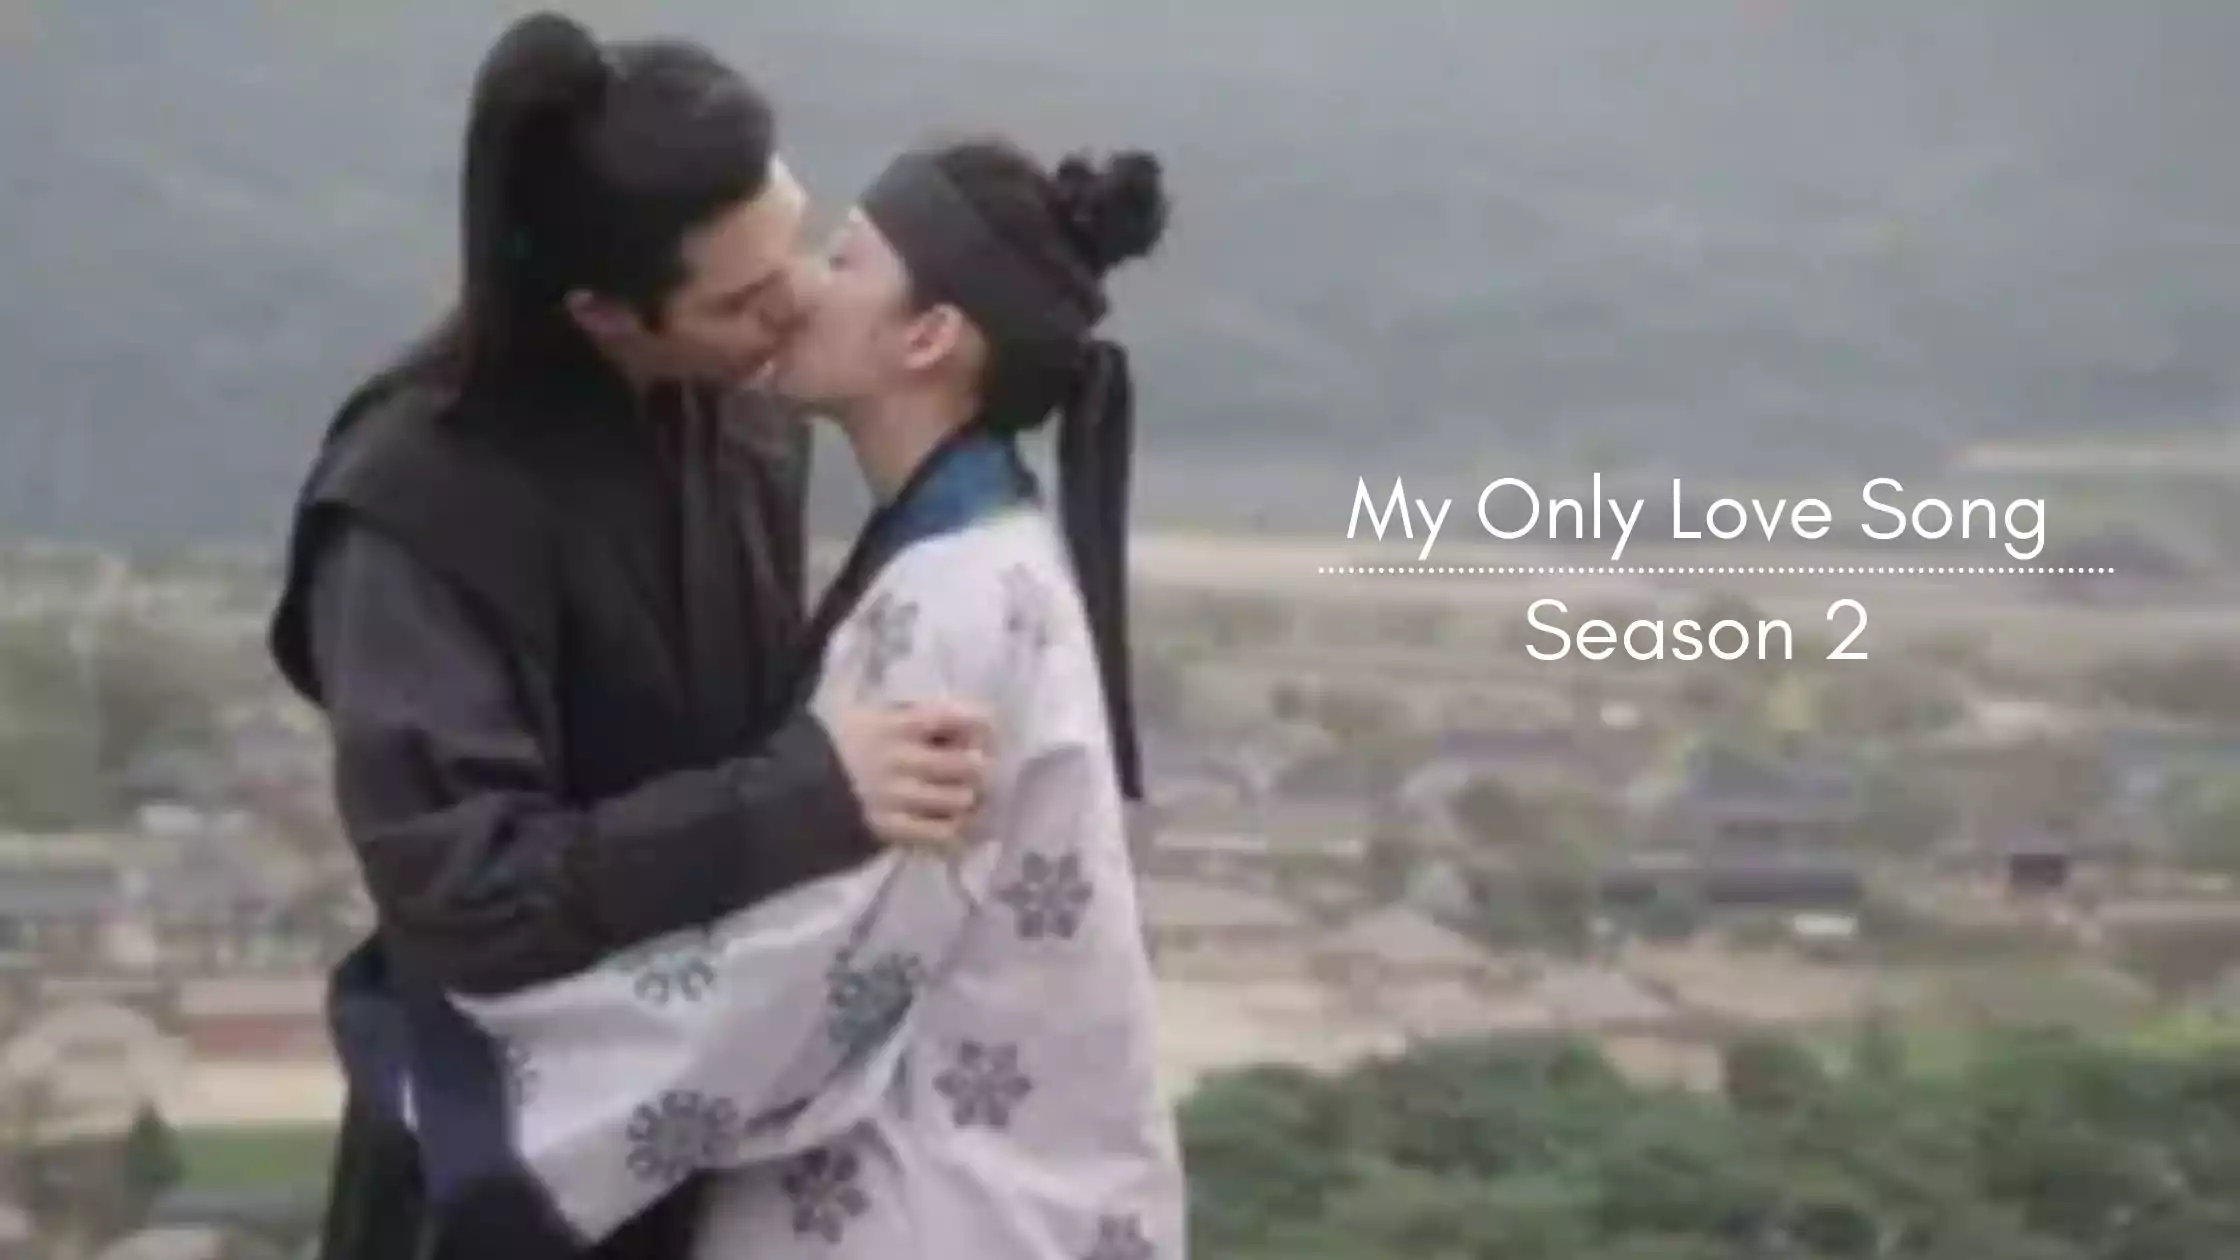 My Only Love Song Season 2 Release Date